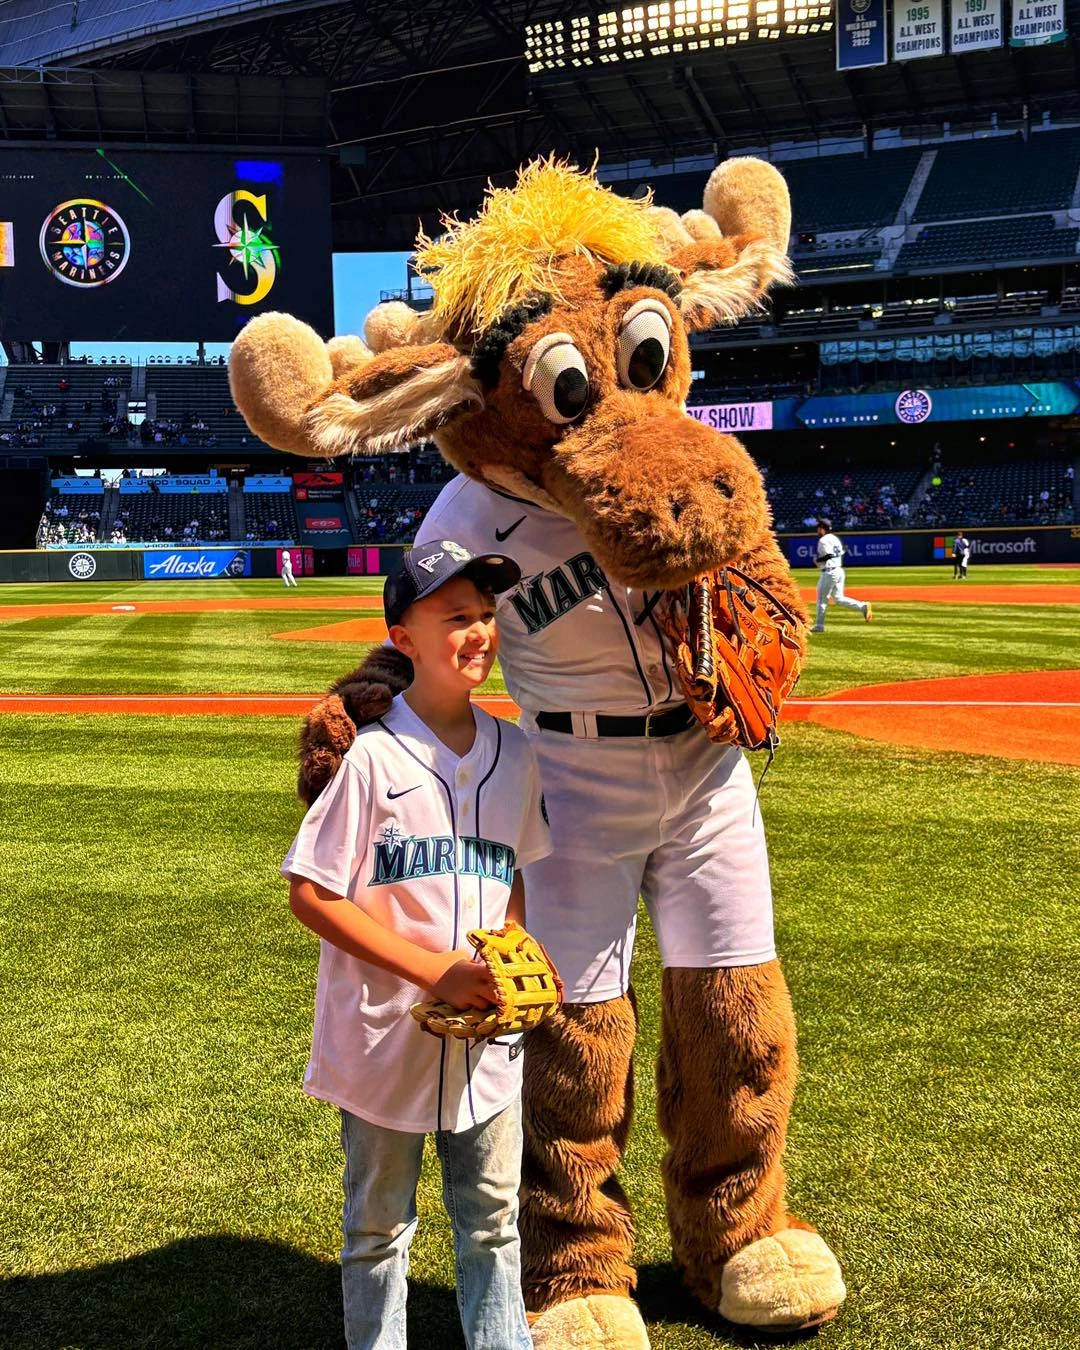 Asher Niles throws first pitch at Seattle Mariners game